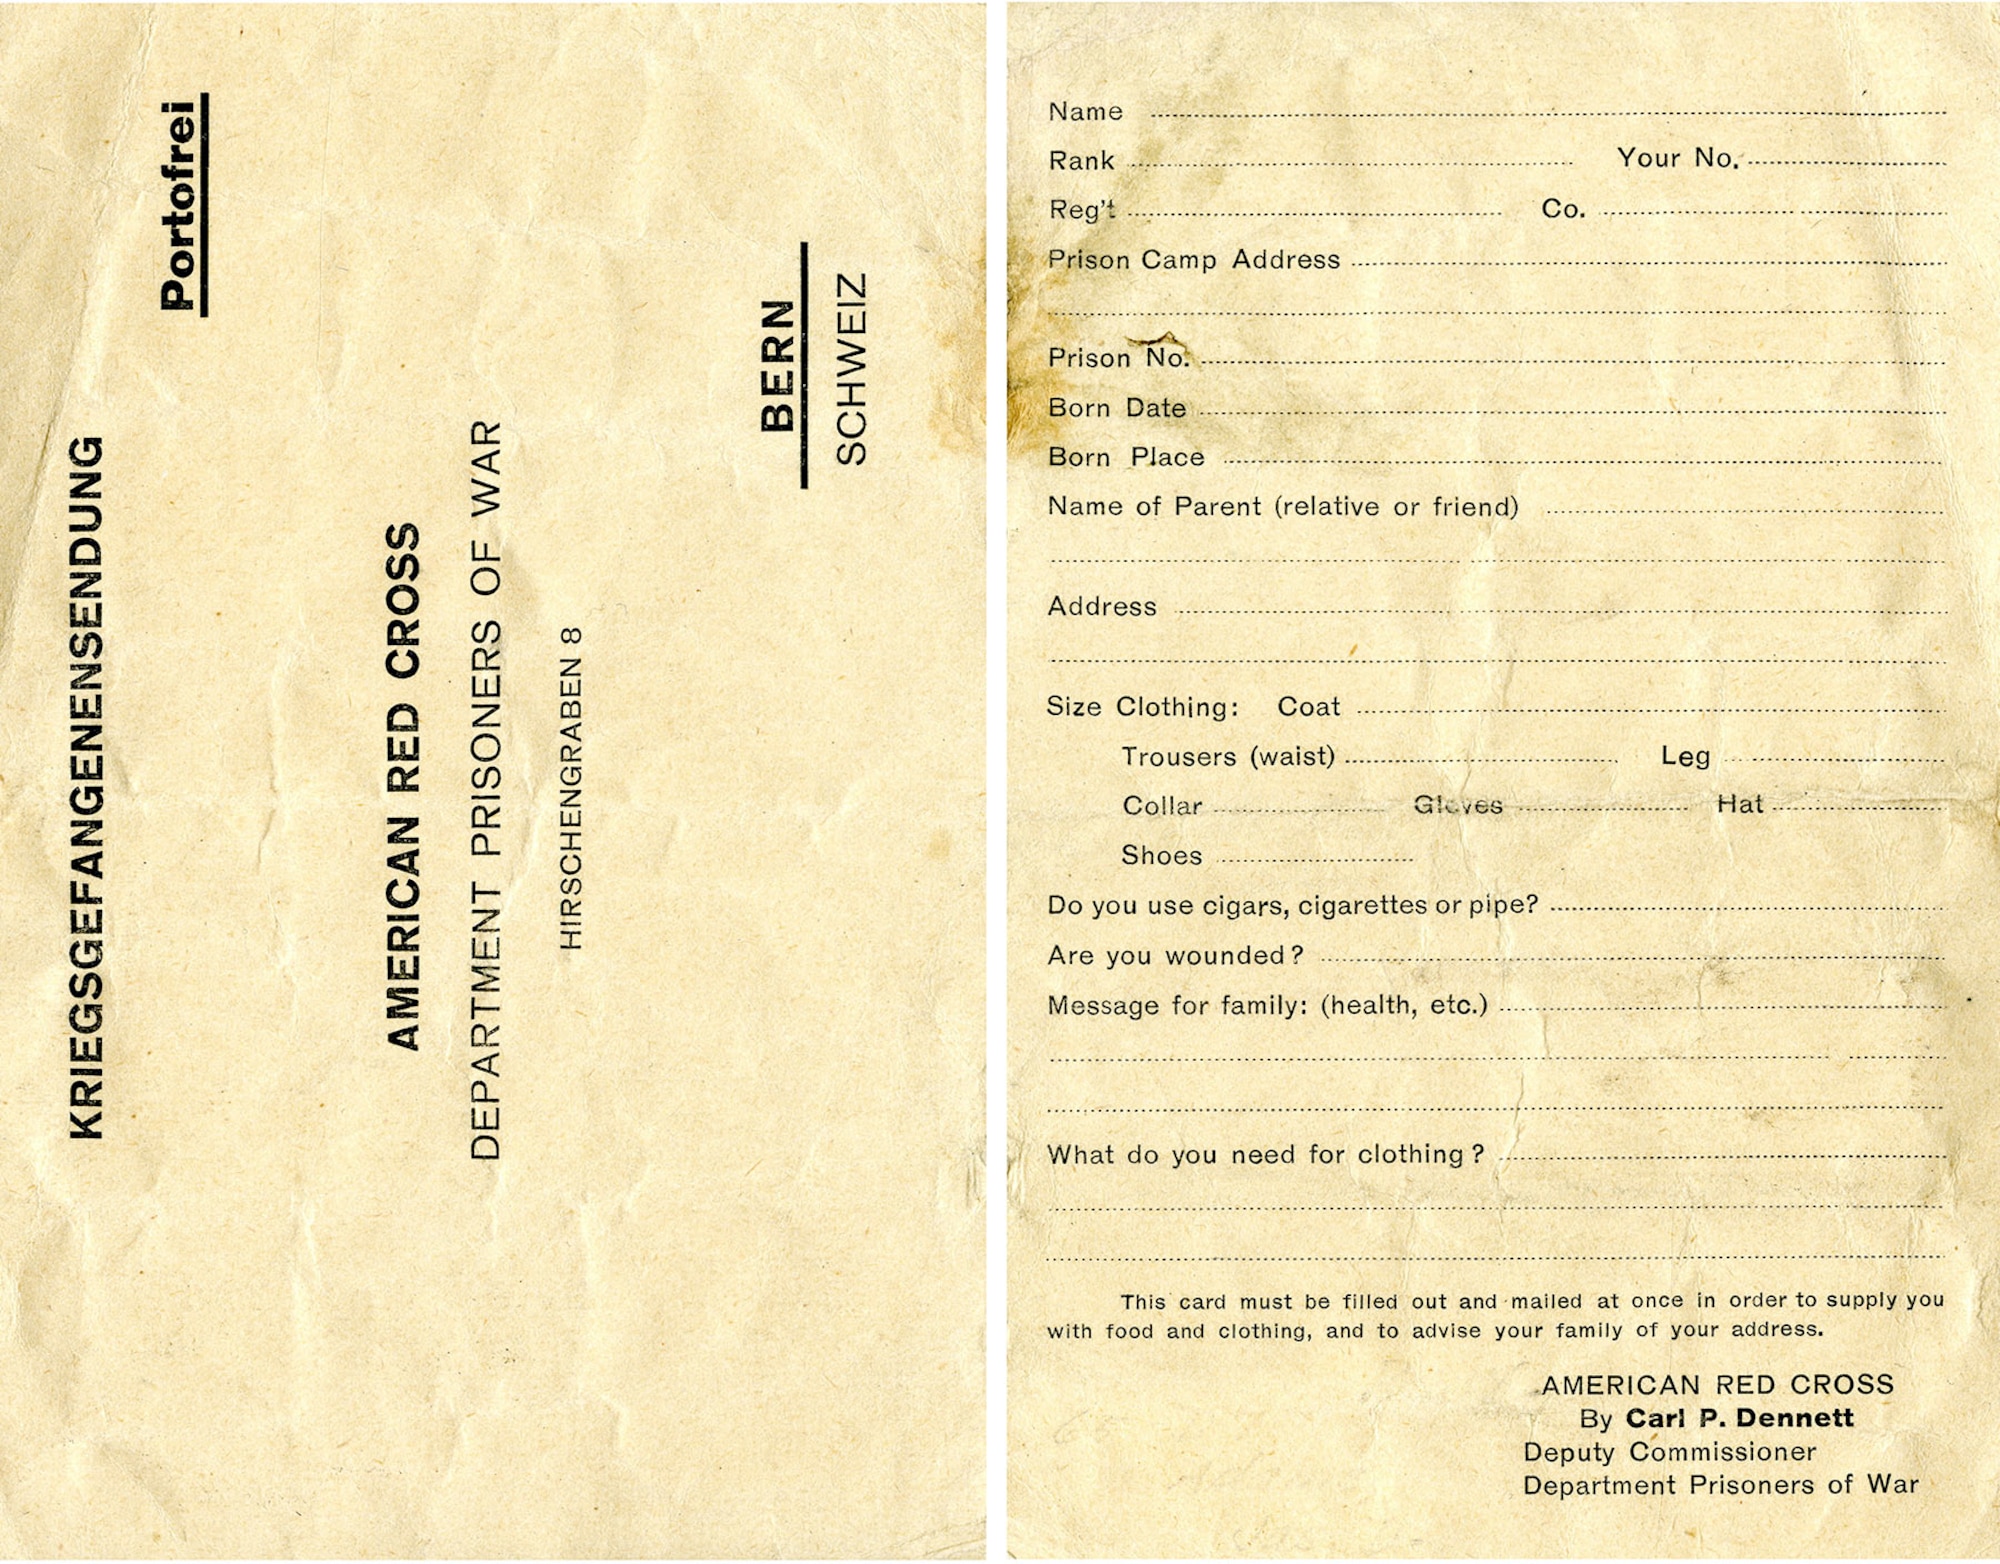 This card was handed out to American POWs in Germany by the Red Cross. This simple questionnaire enabled the Red Cross to promptly inform families that their loved one had been captured and establish the material needs of the individual prisoner. (U.S. Air Force photo)